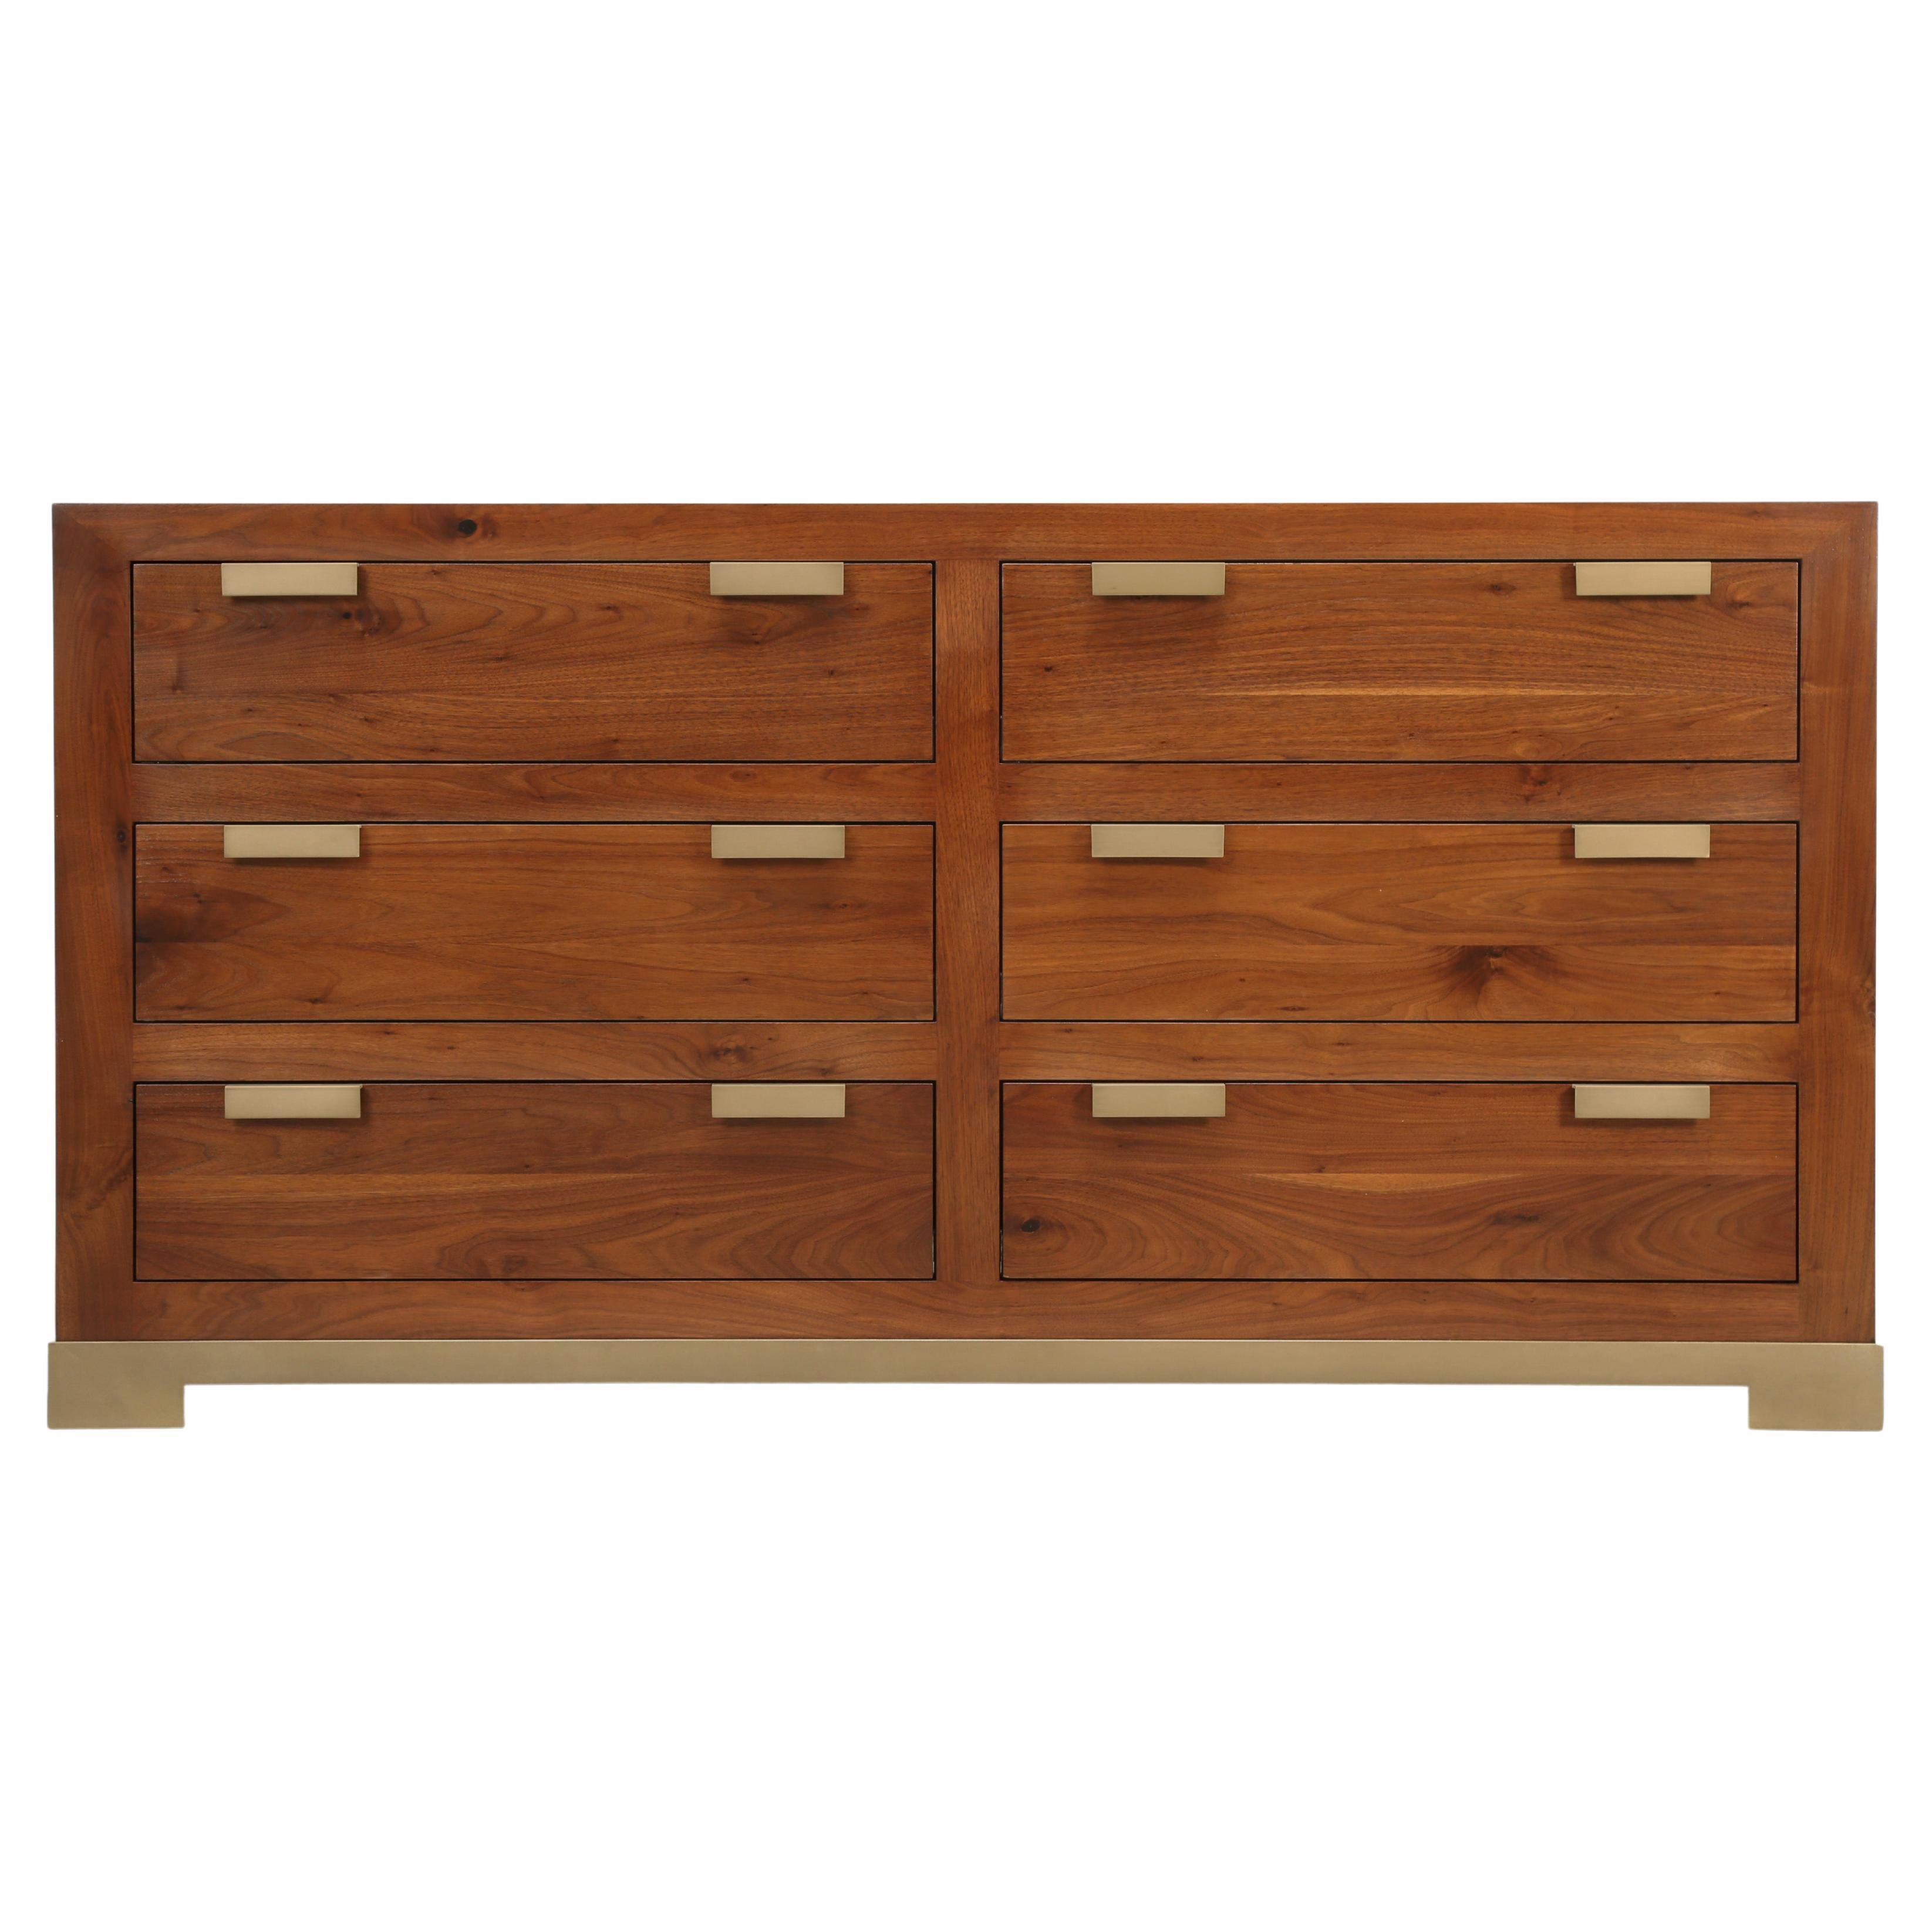 Solid Walnut Dresser or Chest of Drawers Made to Order, Any Dimension or Finish